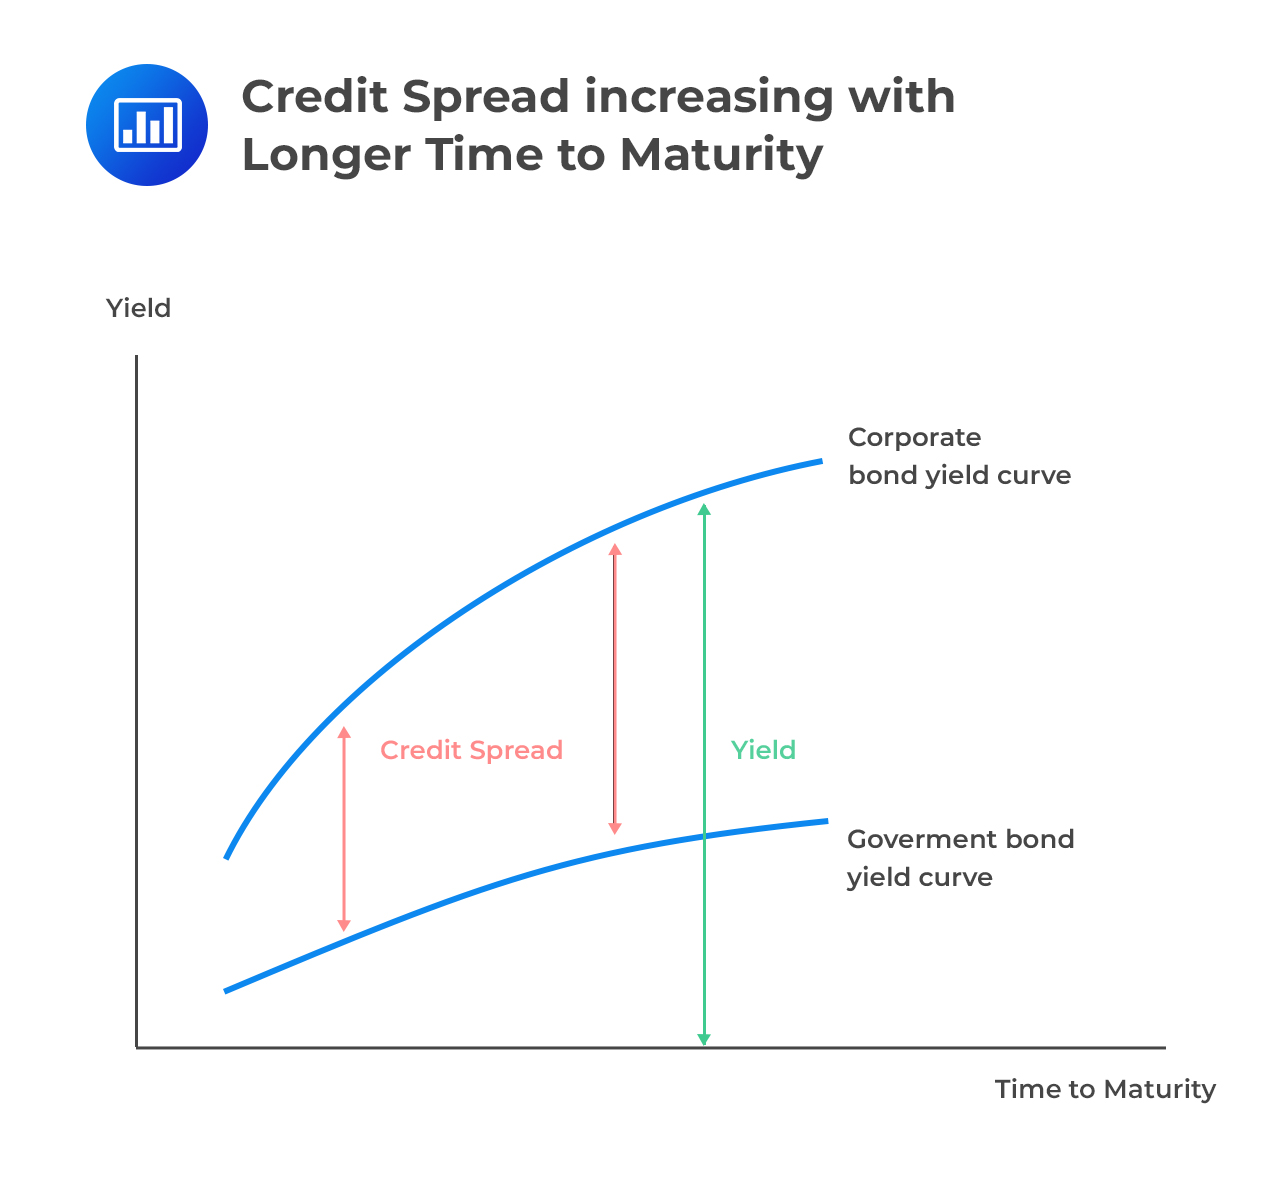 Credit Spread increasing with Longer Time to Maturity